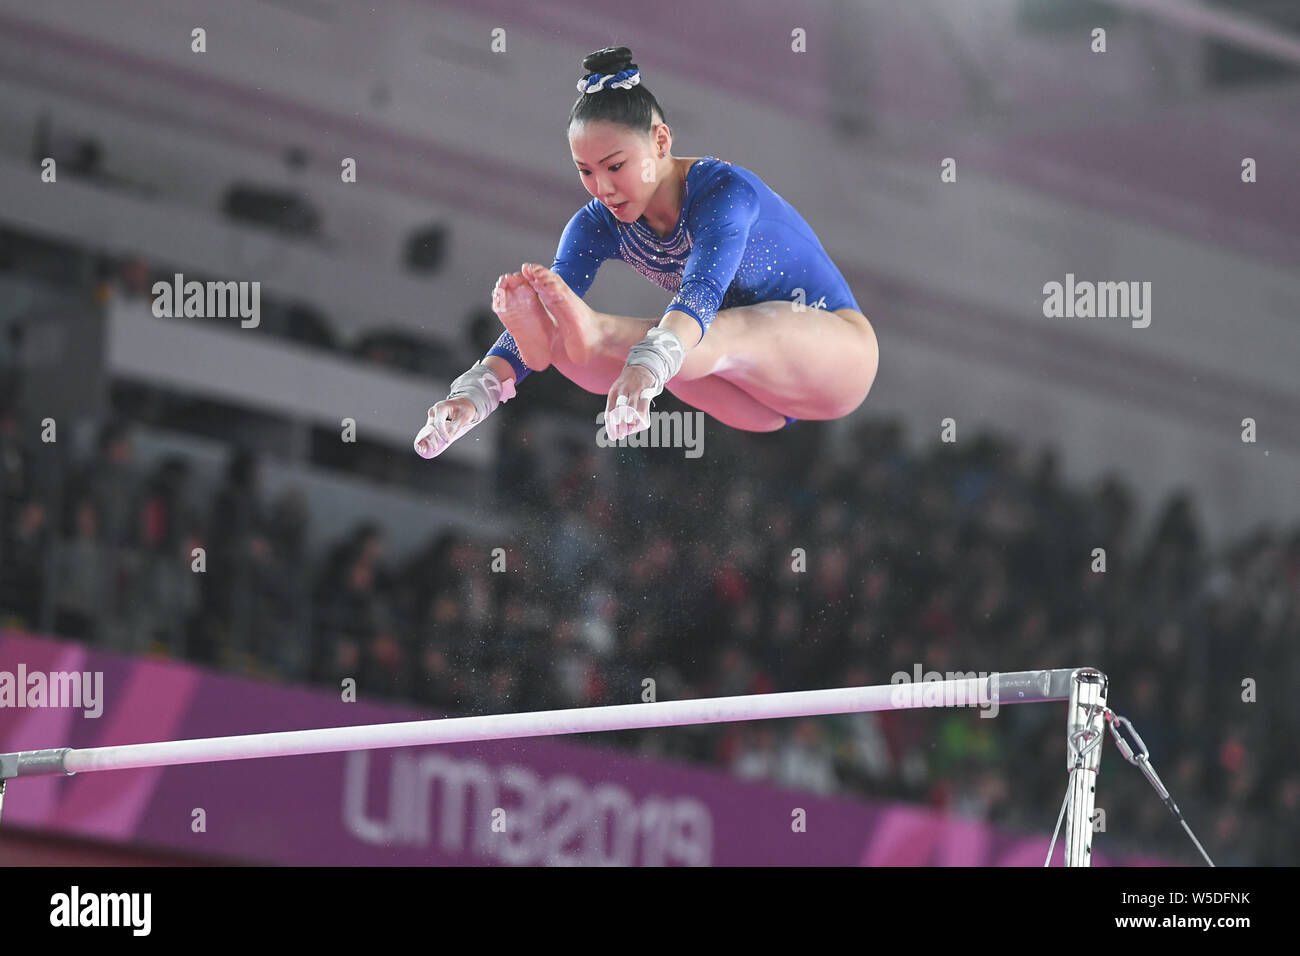 July 27, 2019, Lima, Peru: KARA EAKER, from the US, competes on the uneven bars during the team finals competition held in the Polideportivo Villa El Salvador  in Lima, Peru. (Credit Image: © Amy Sanderson/ZUMA Wire) Stock Photo